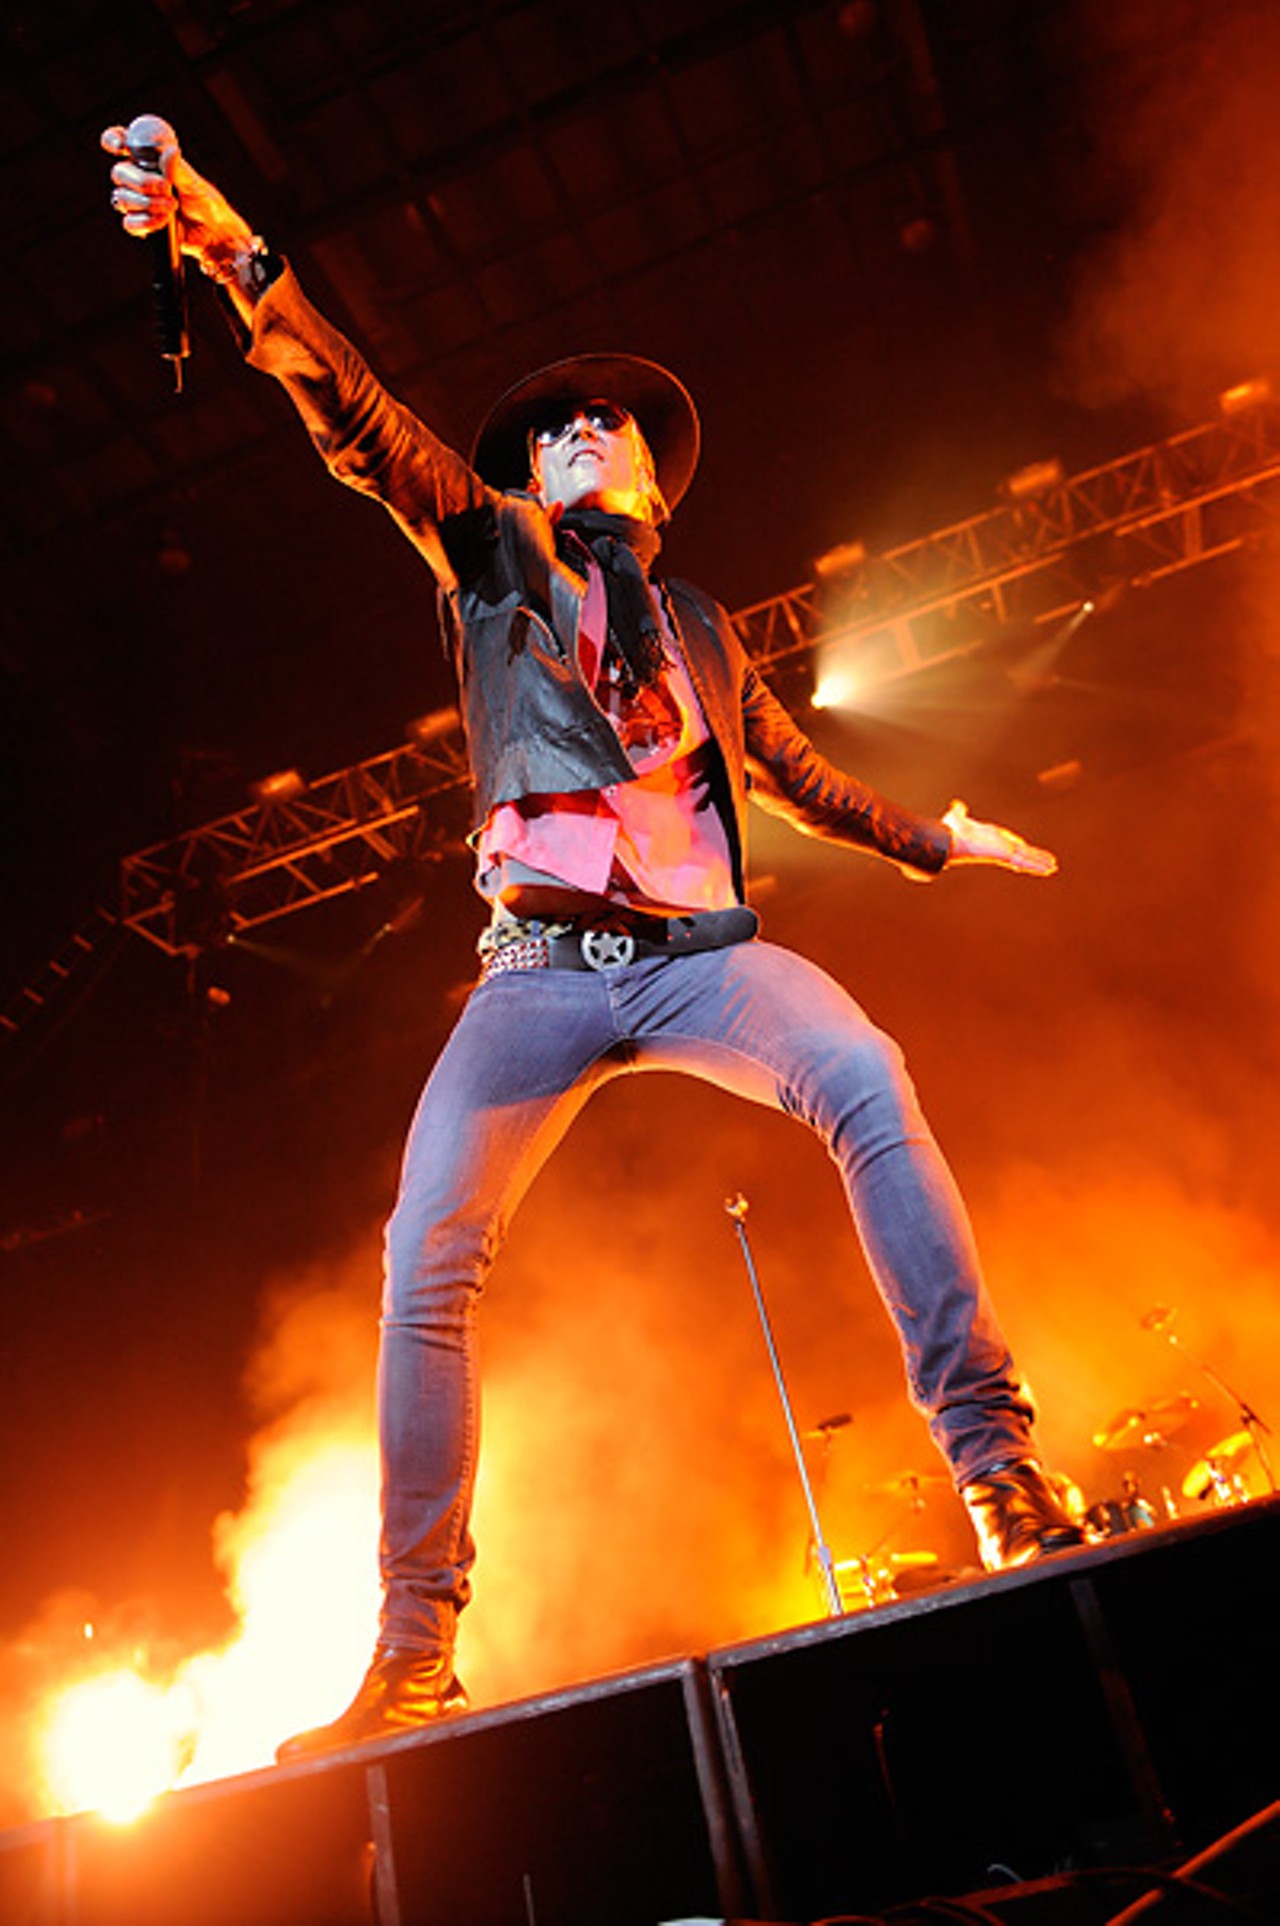 After a reserved start, frontman Scott Weiland launched into the performance and engaged the crowd with numerous trips to the front of the stage, giving fans exactly what they wanted.